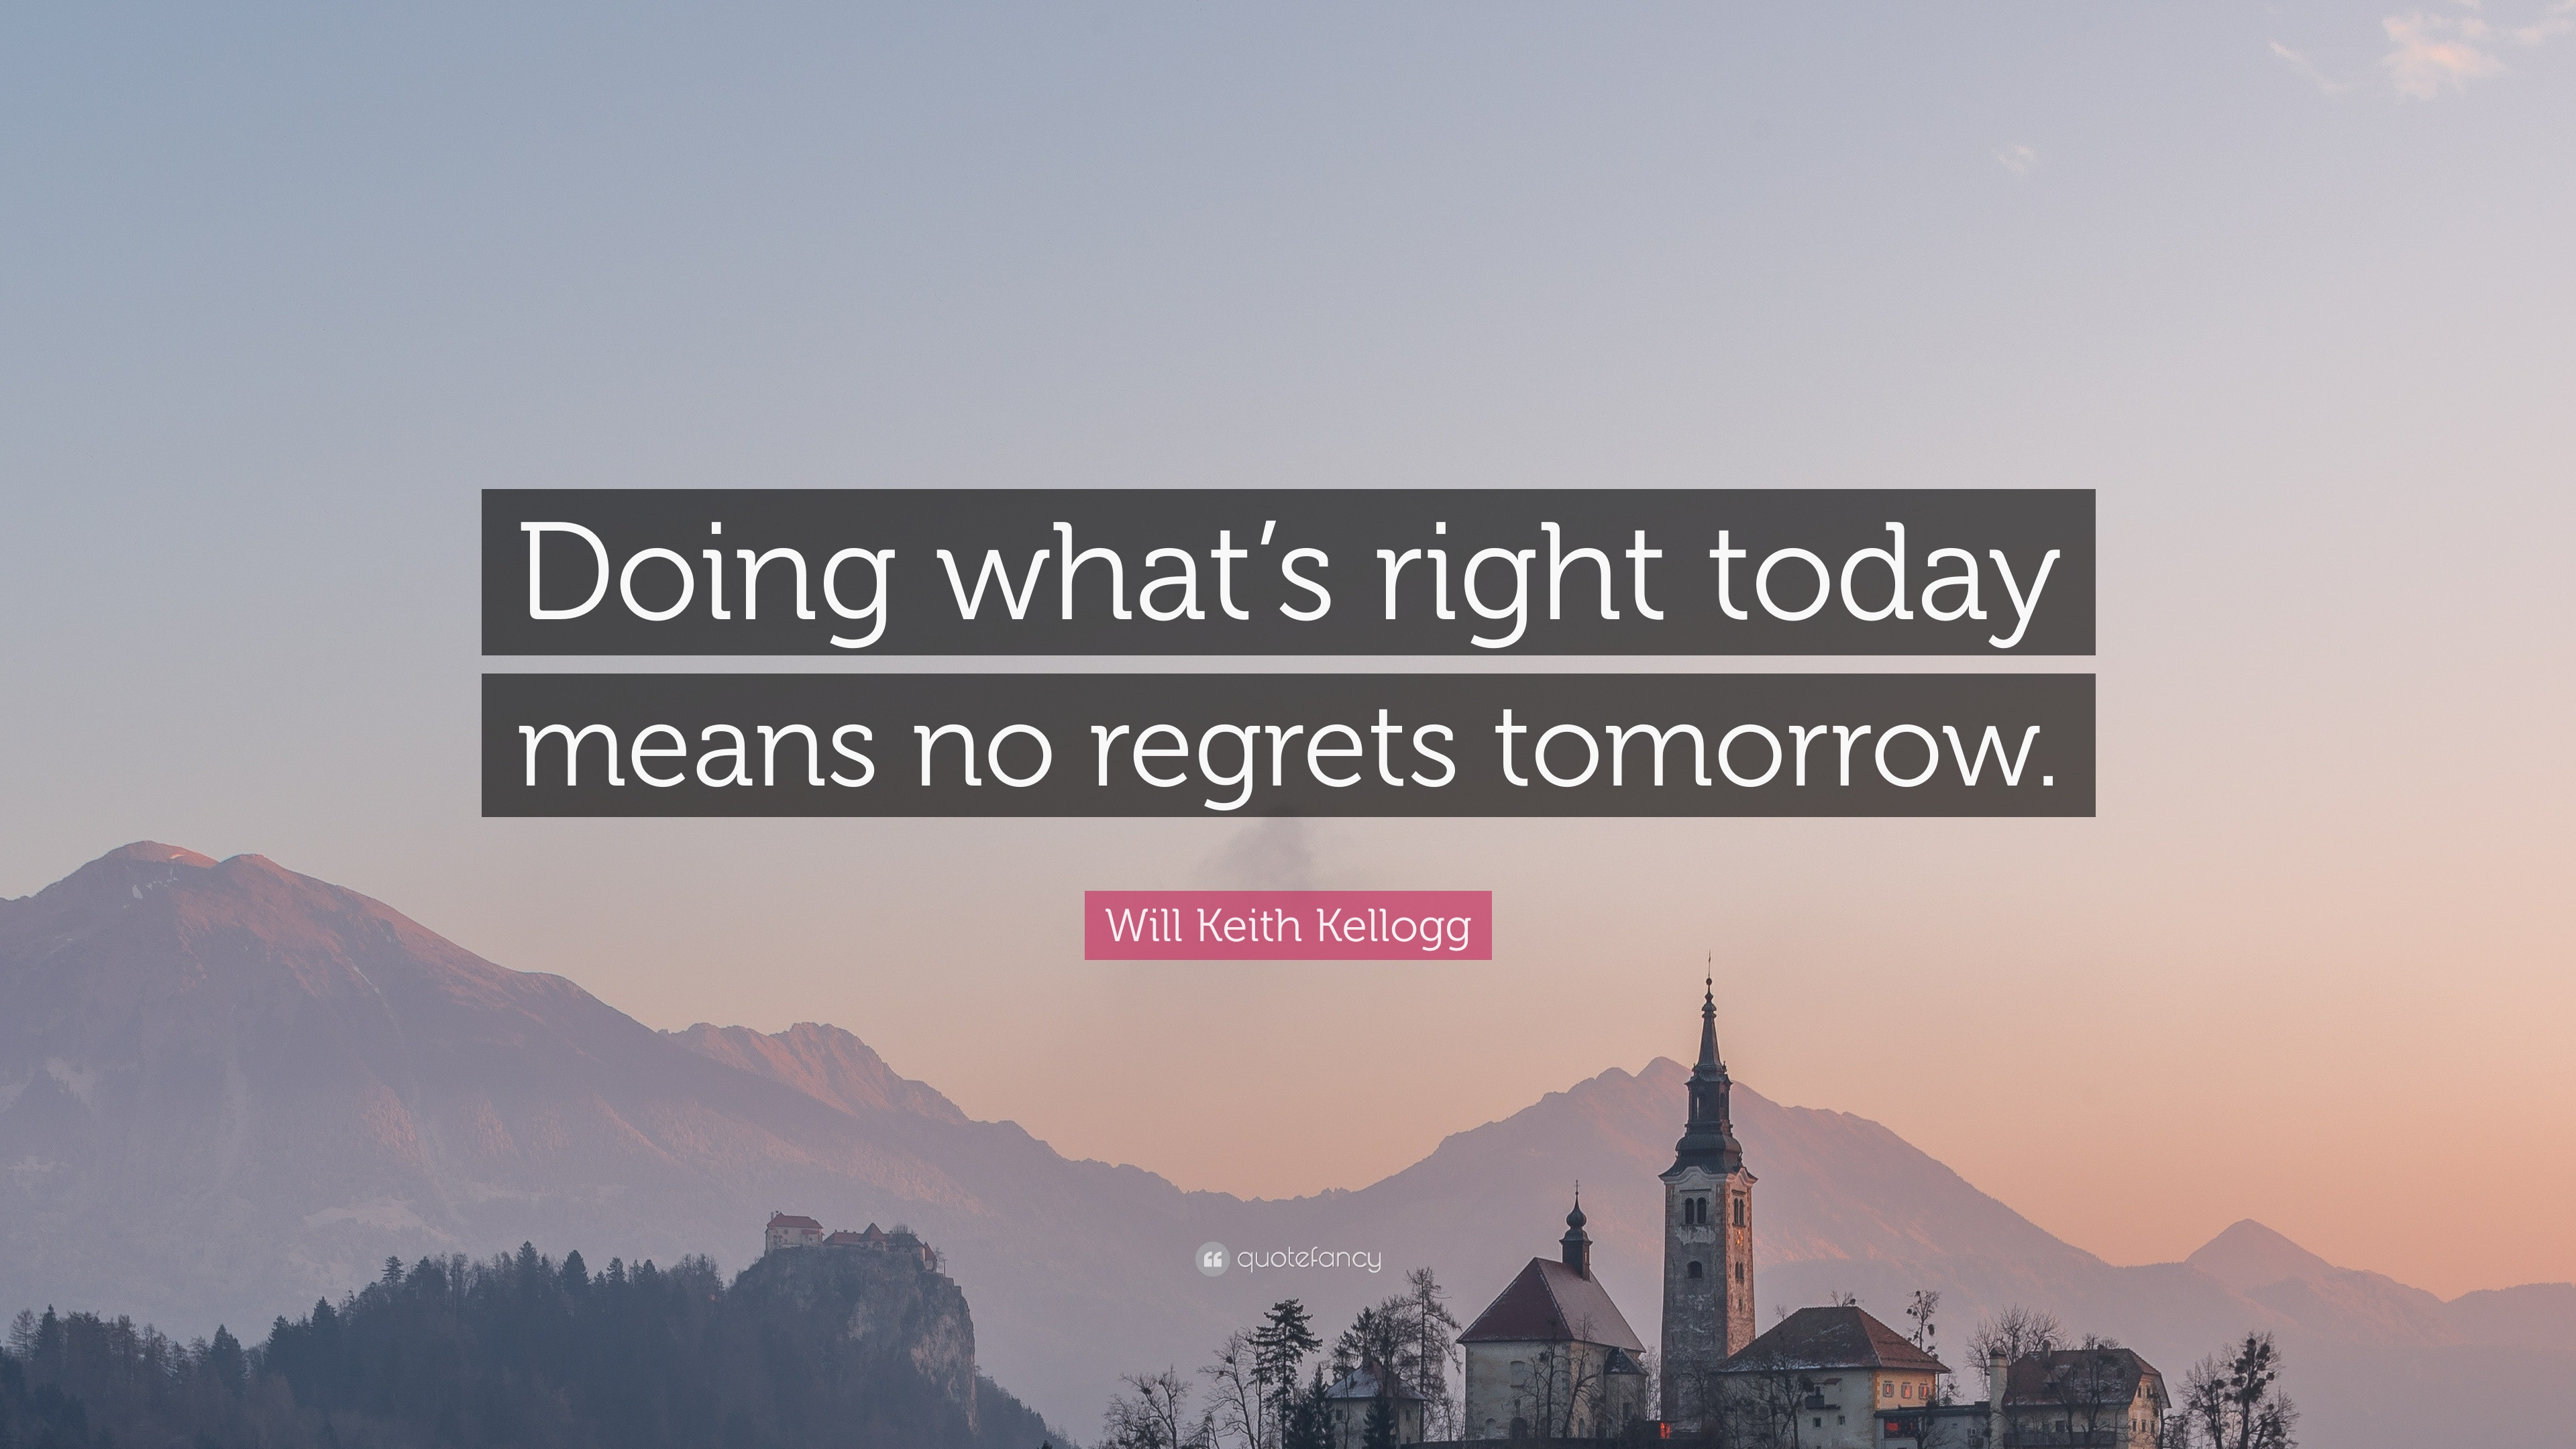 Will Keith Kellogg Quote: “Doing what’s right today means no regrets ...